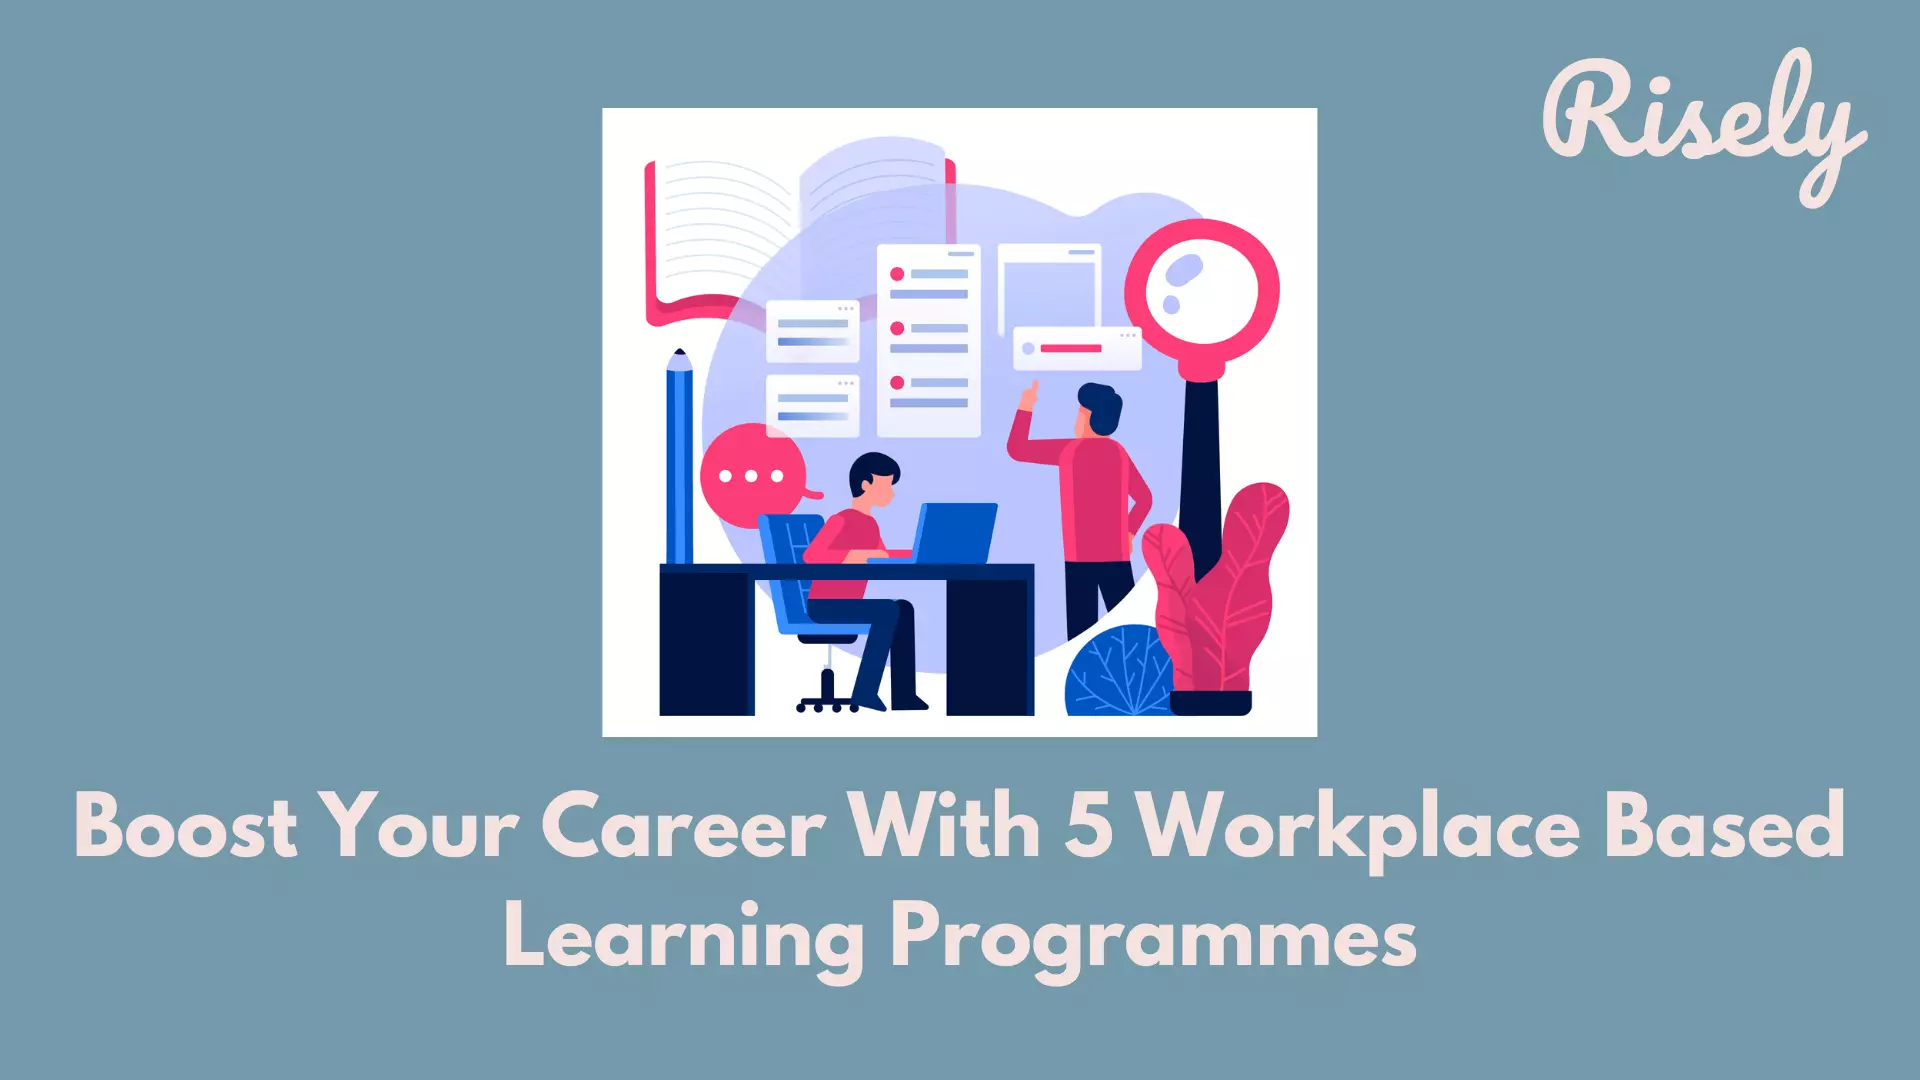 Boost Your Career With 5 Workplace Based Learning Programmes